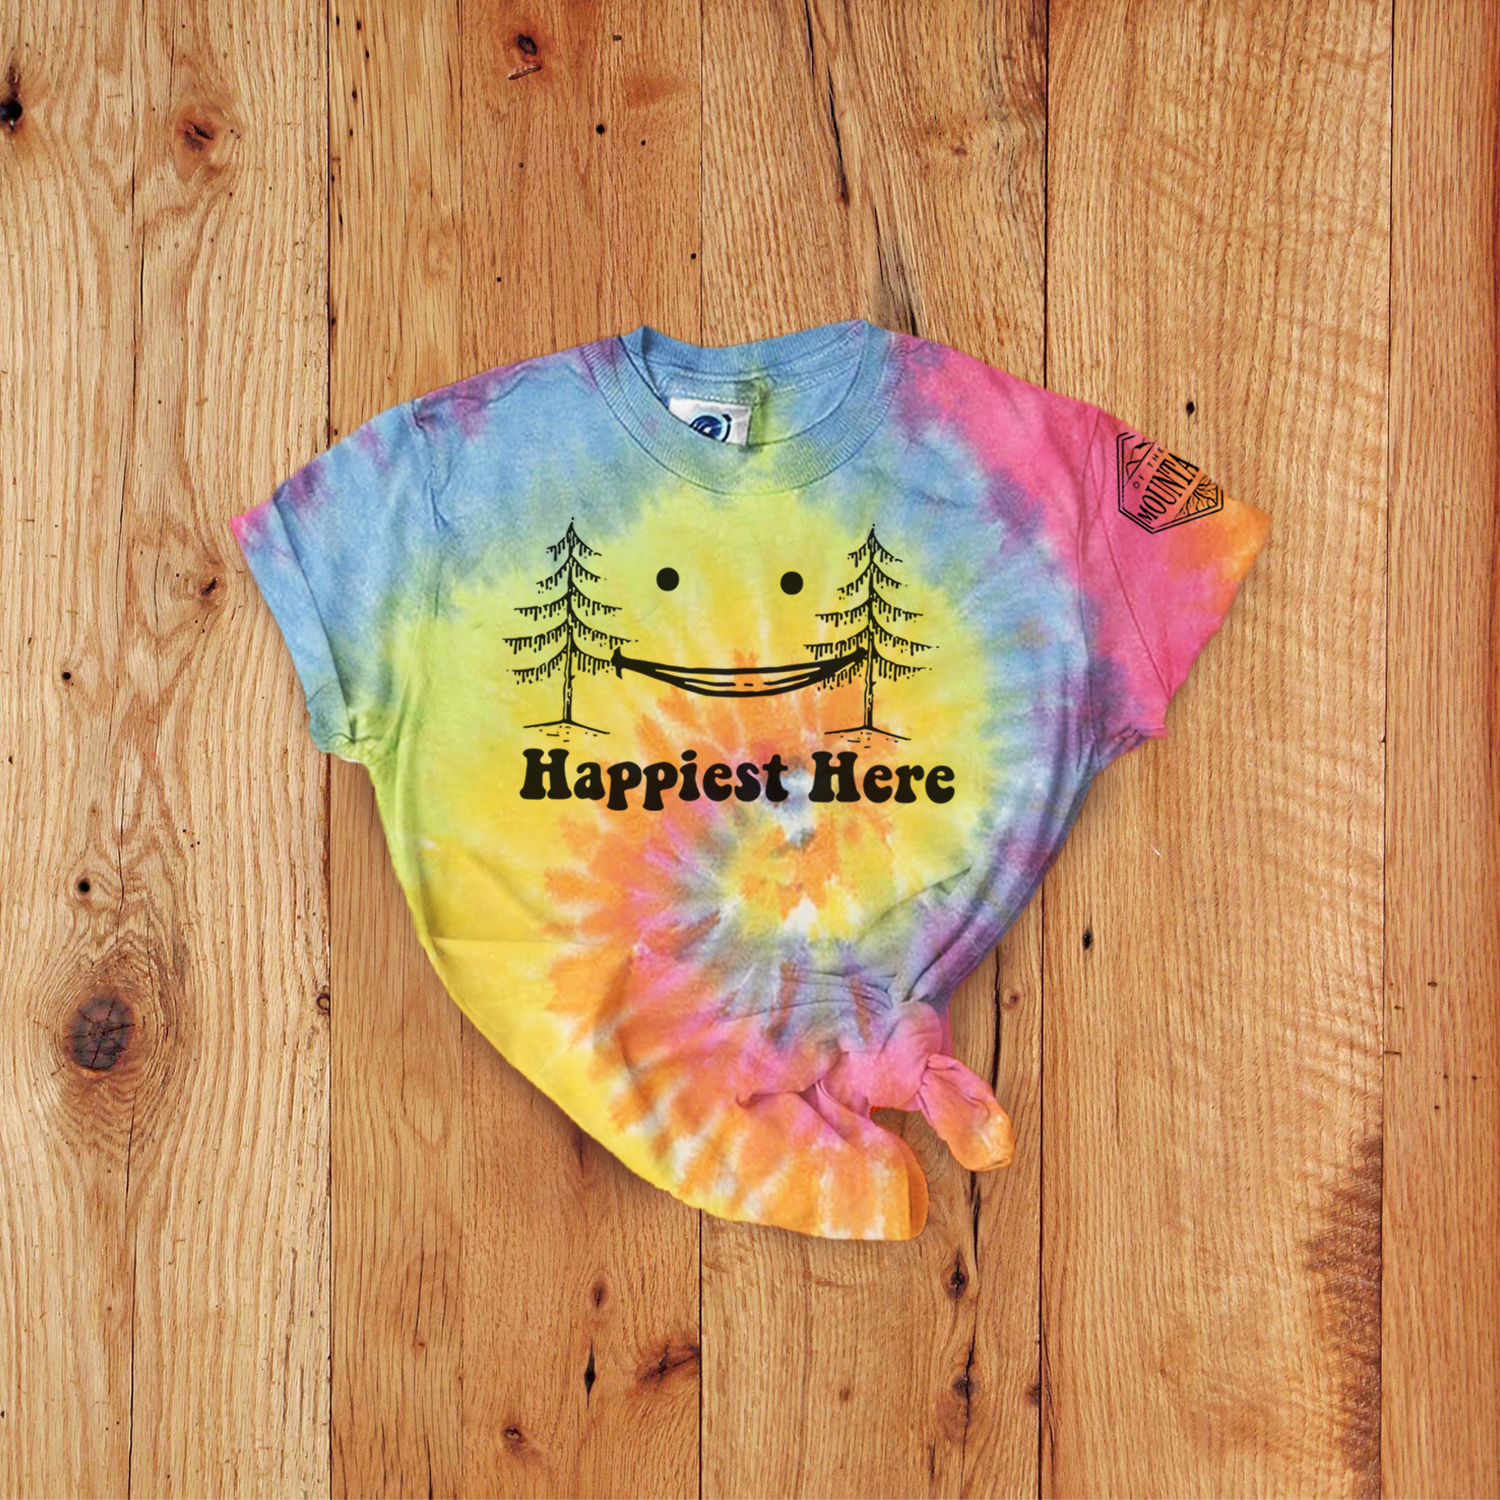 Of These Mountains Happiest Here Toddler Tie Dye Tee